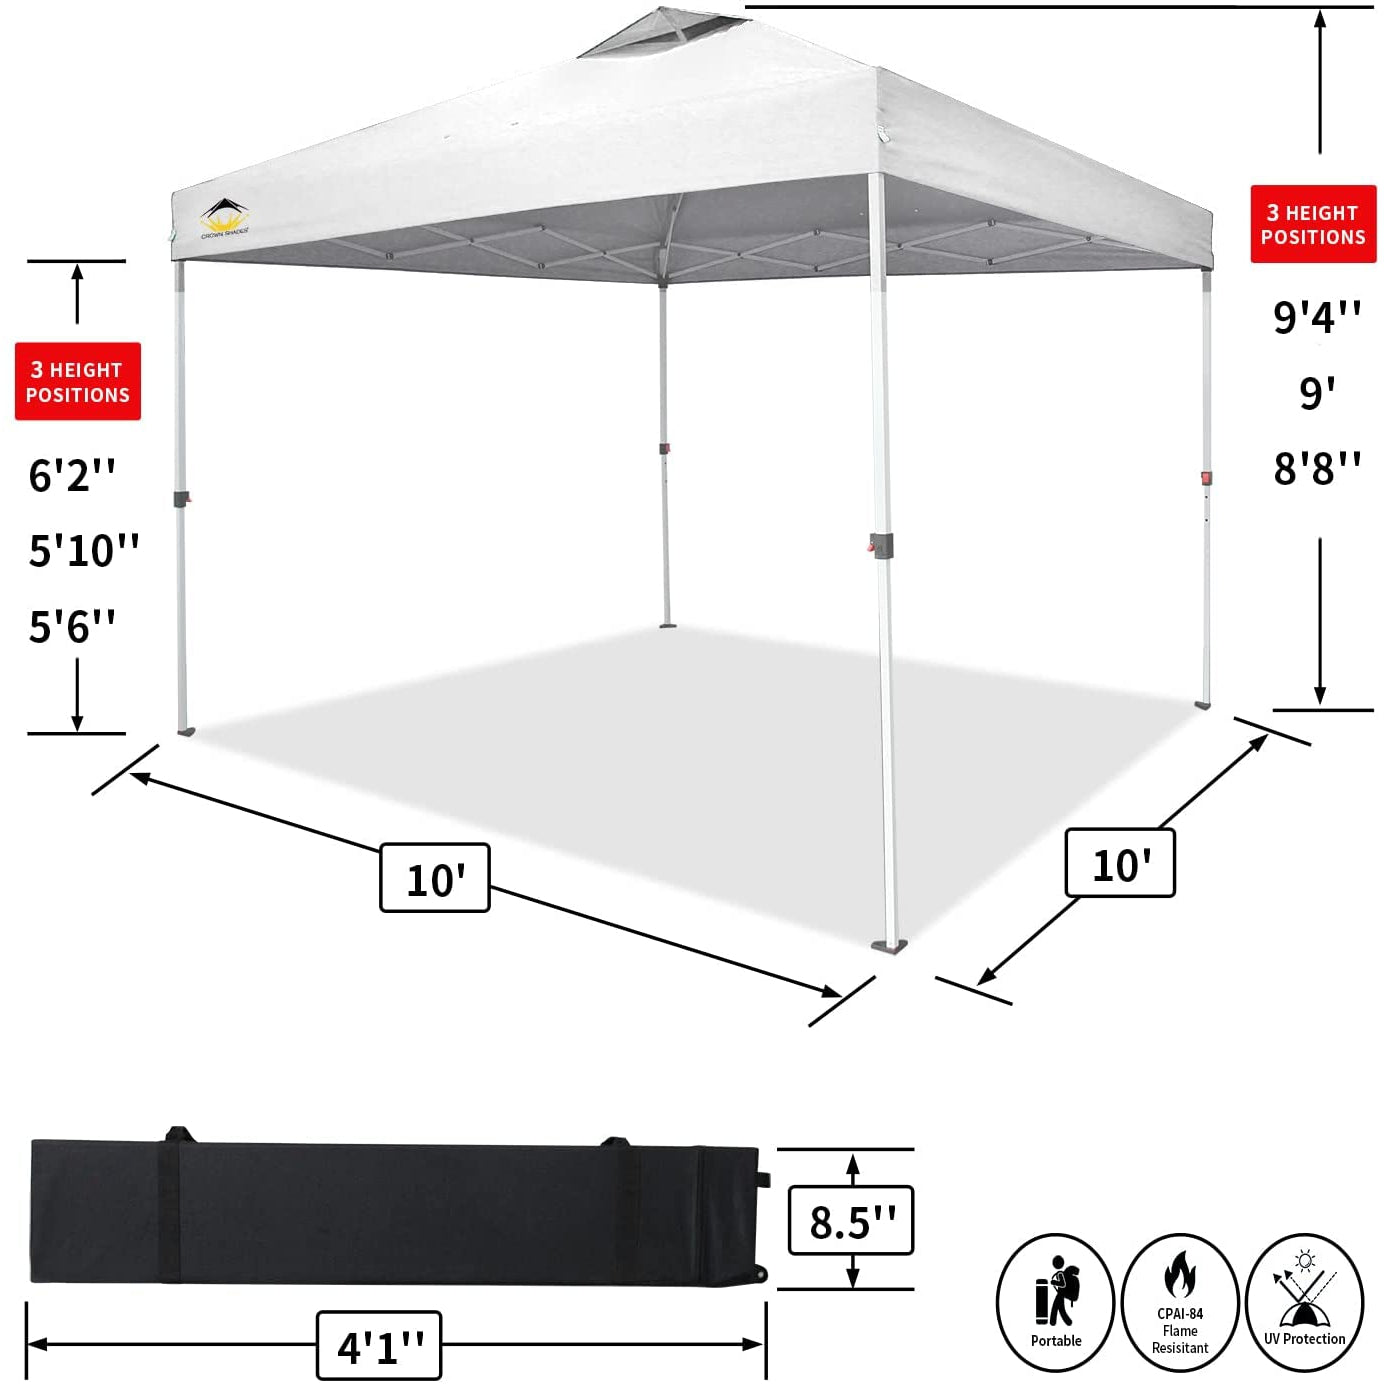 10'x10' Crown Shades Canopy-Your Private Bar